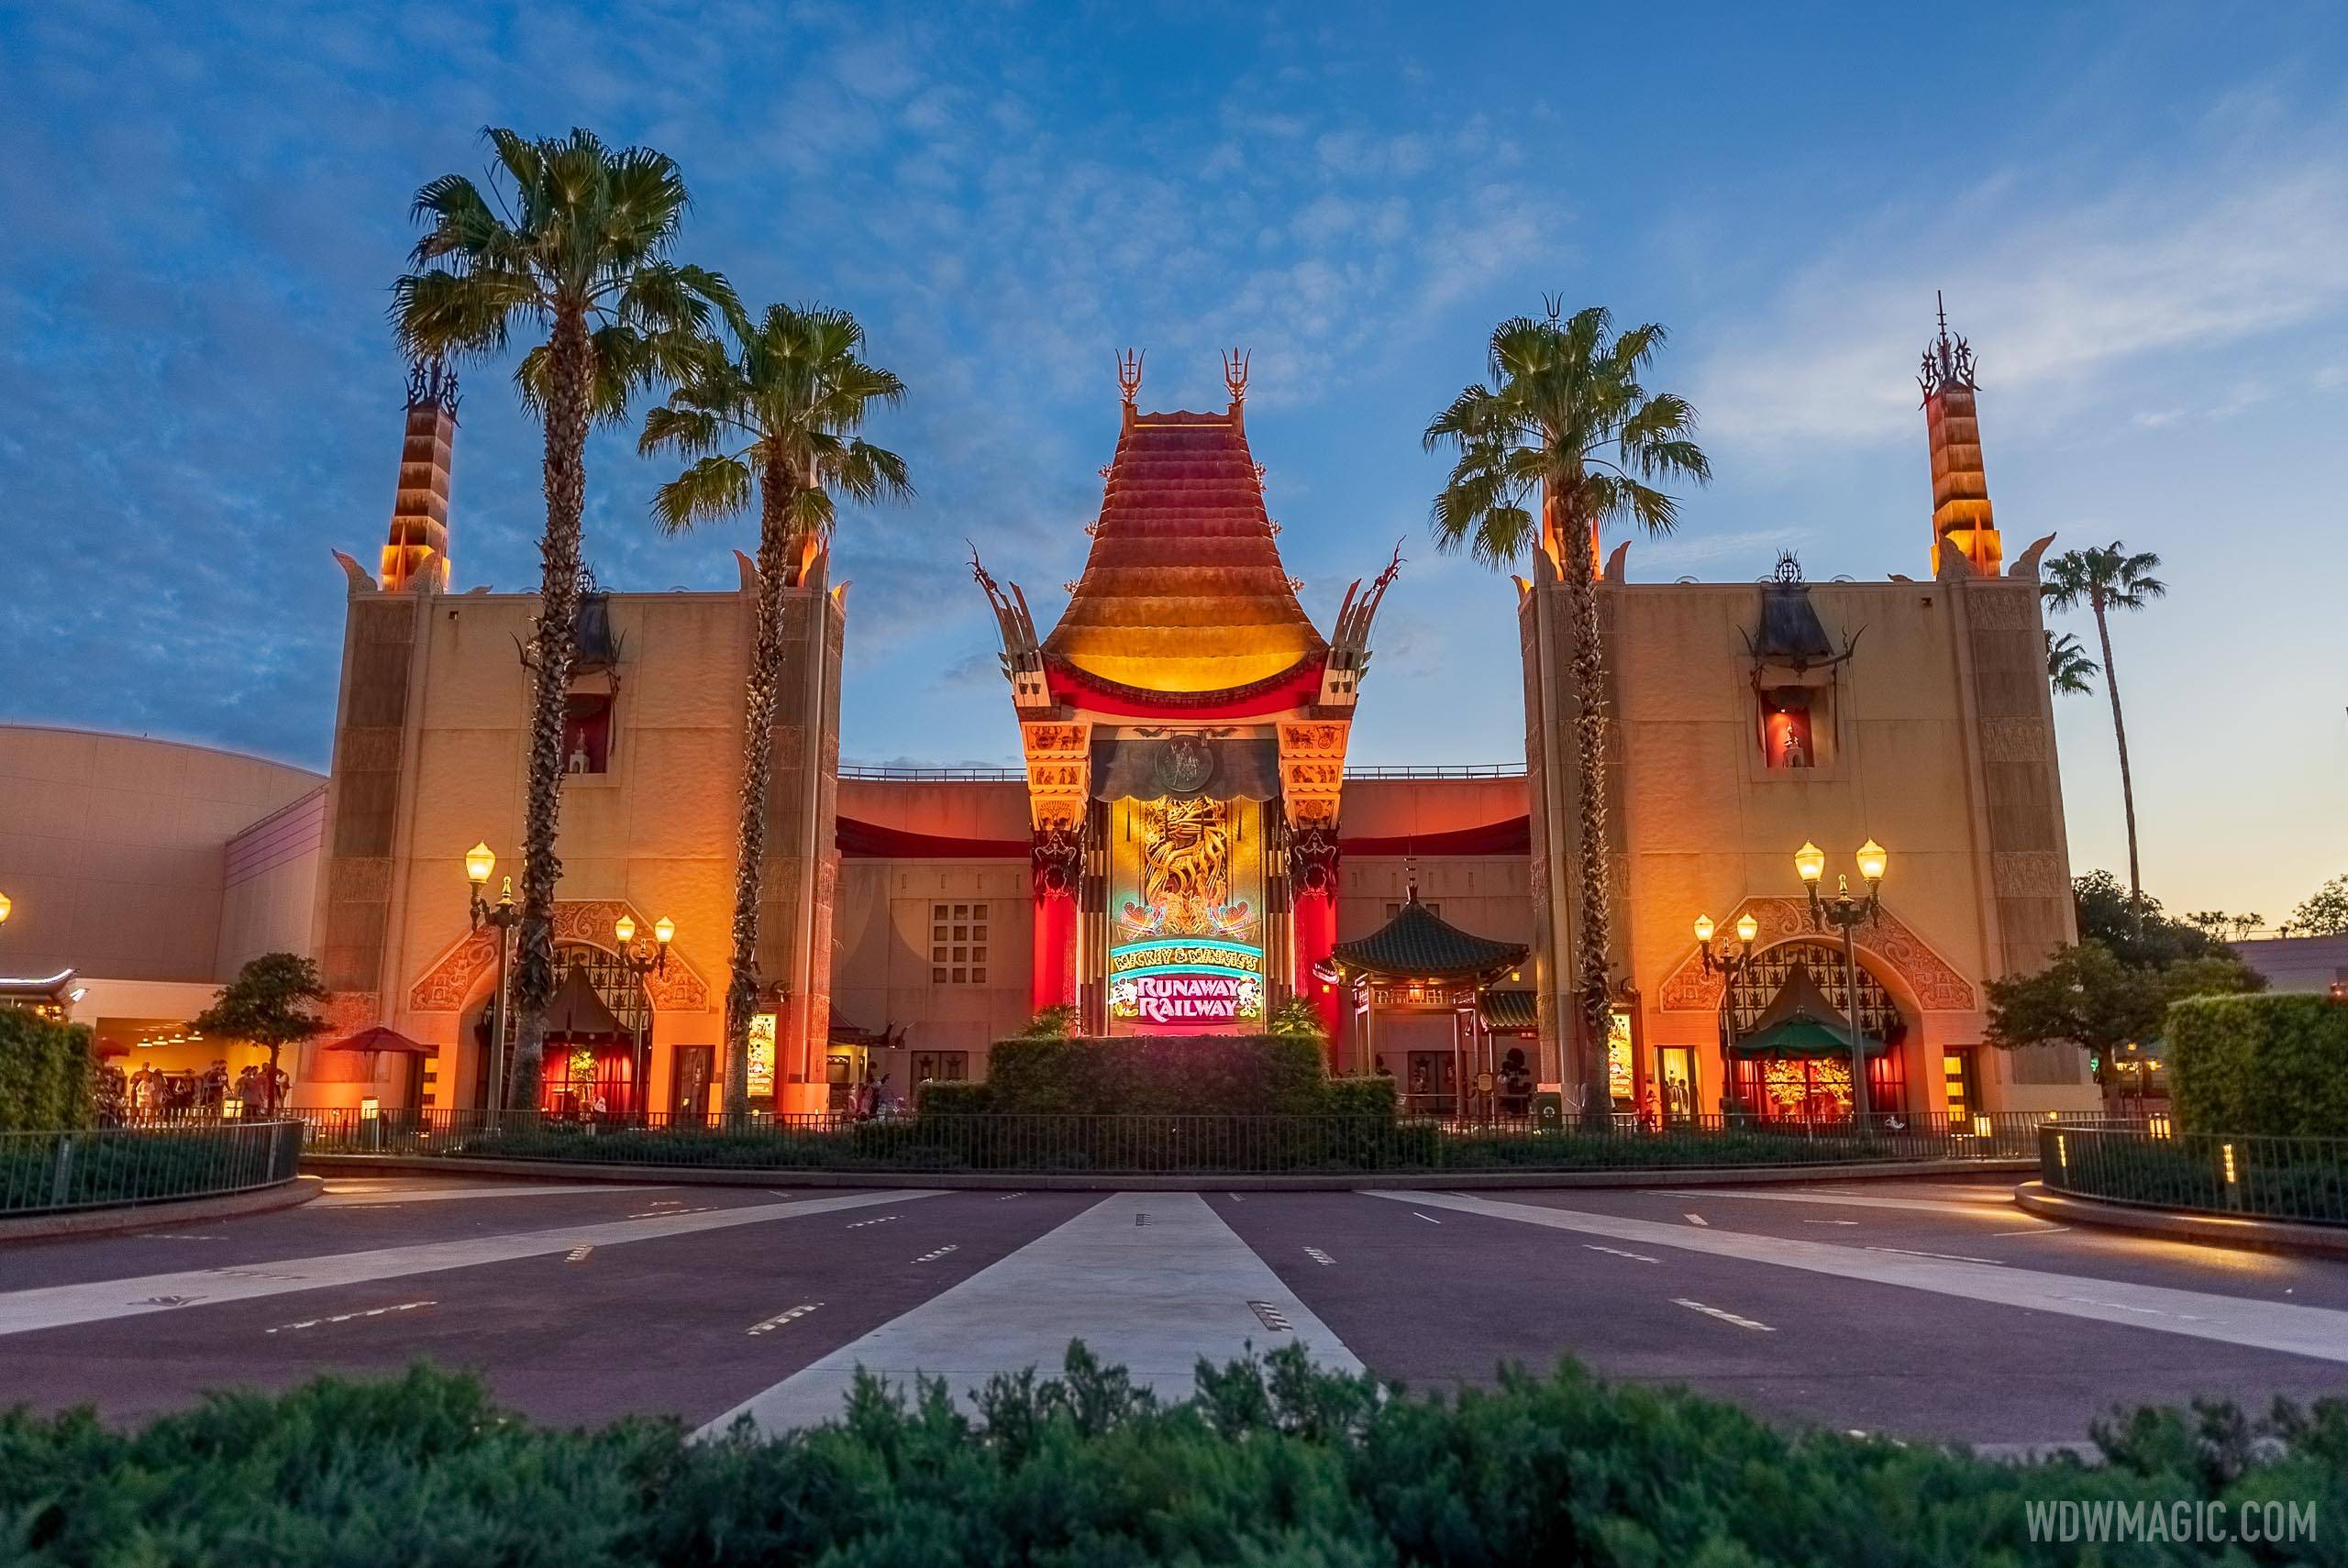 Disney-MGM getting a major makeover on the eve of its 10th anniversary